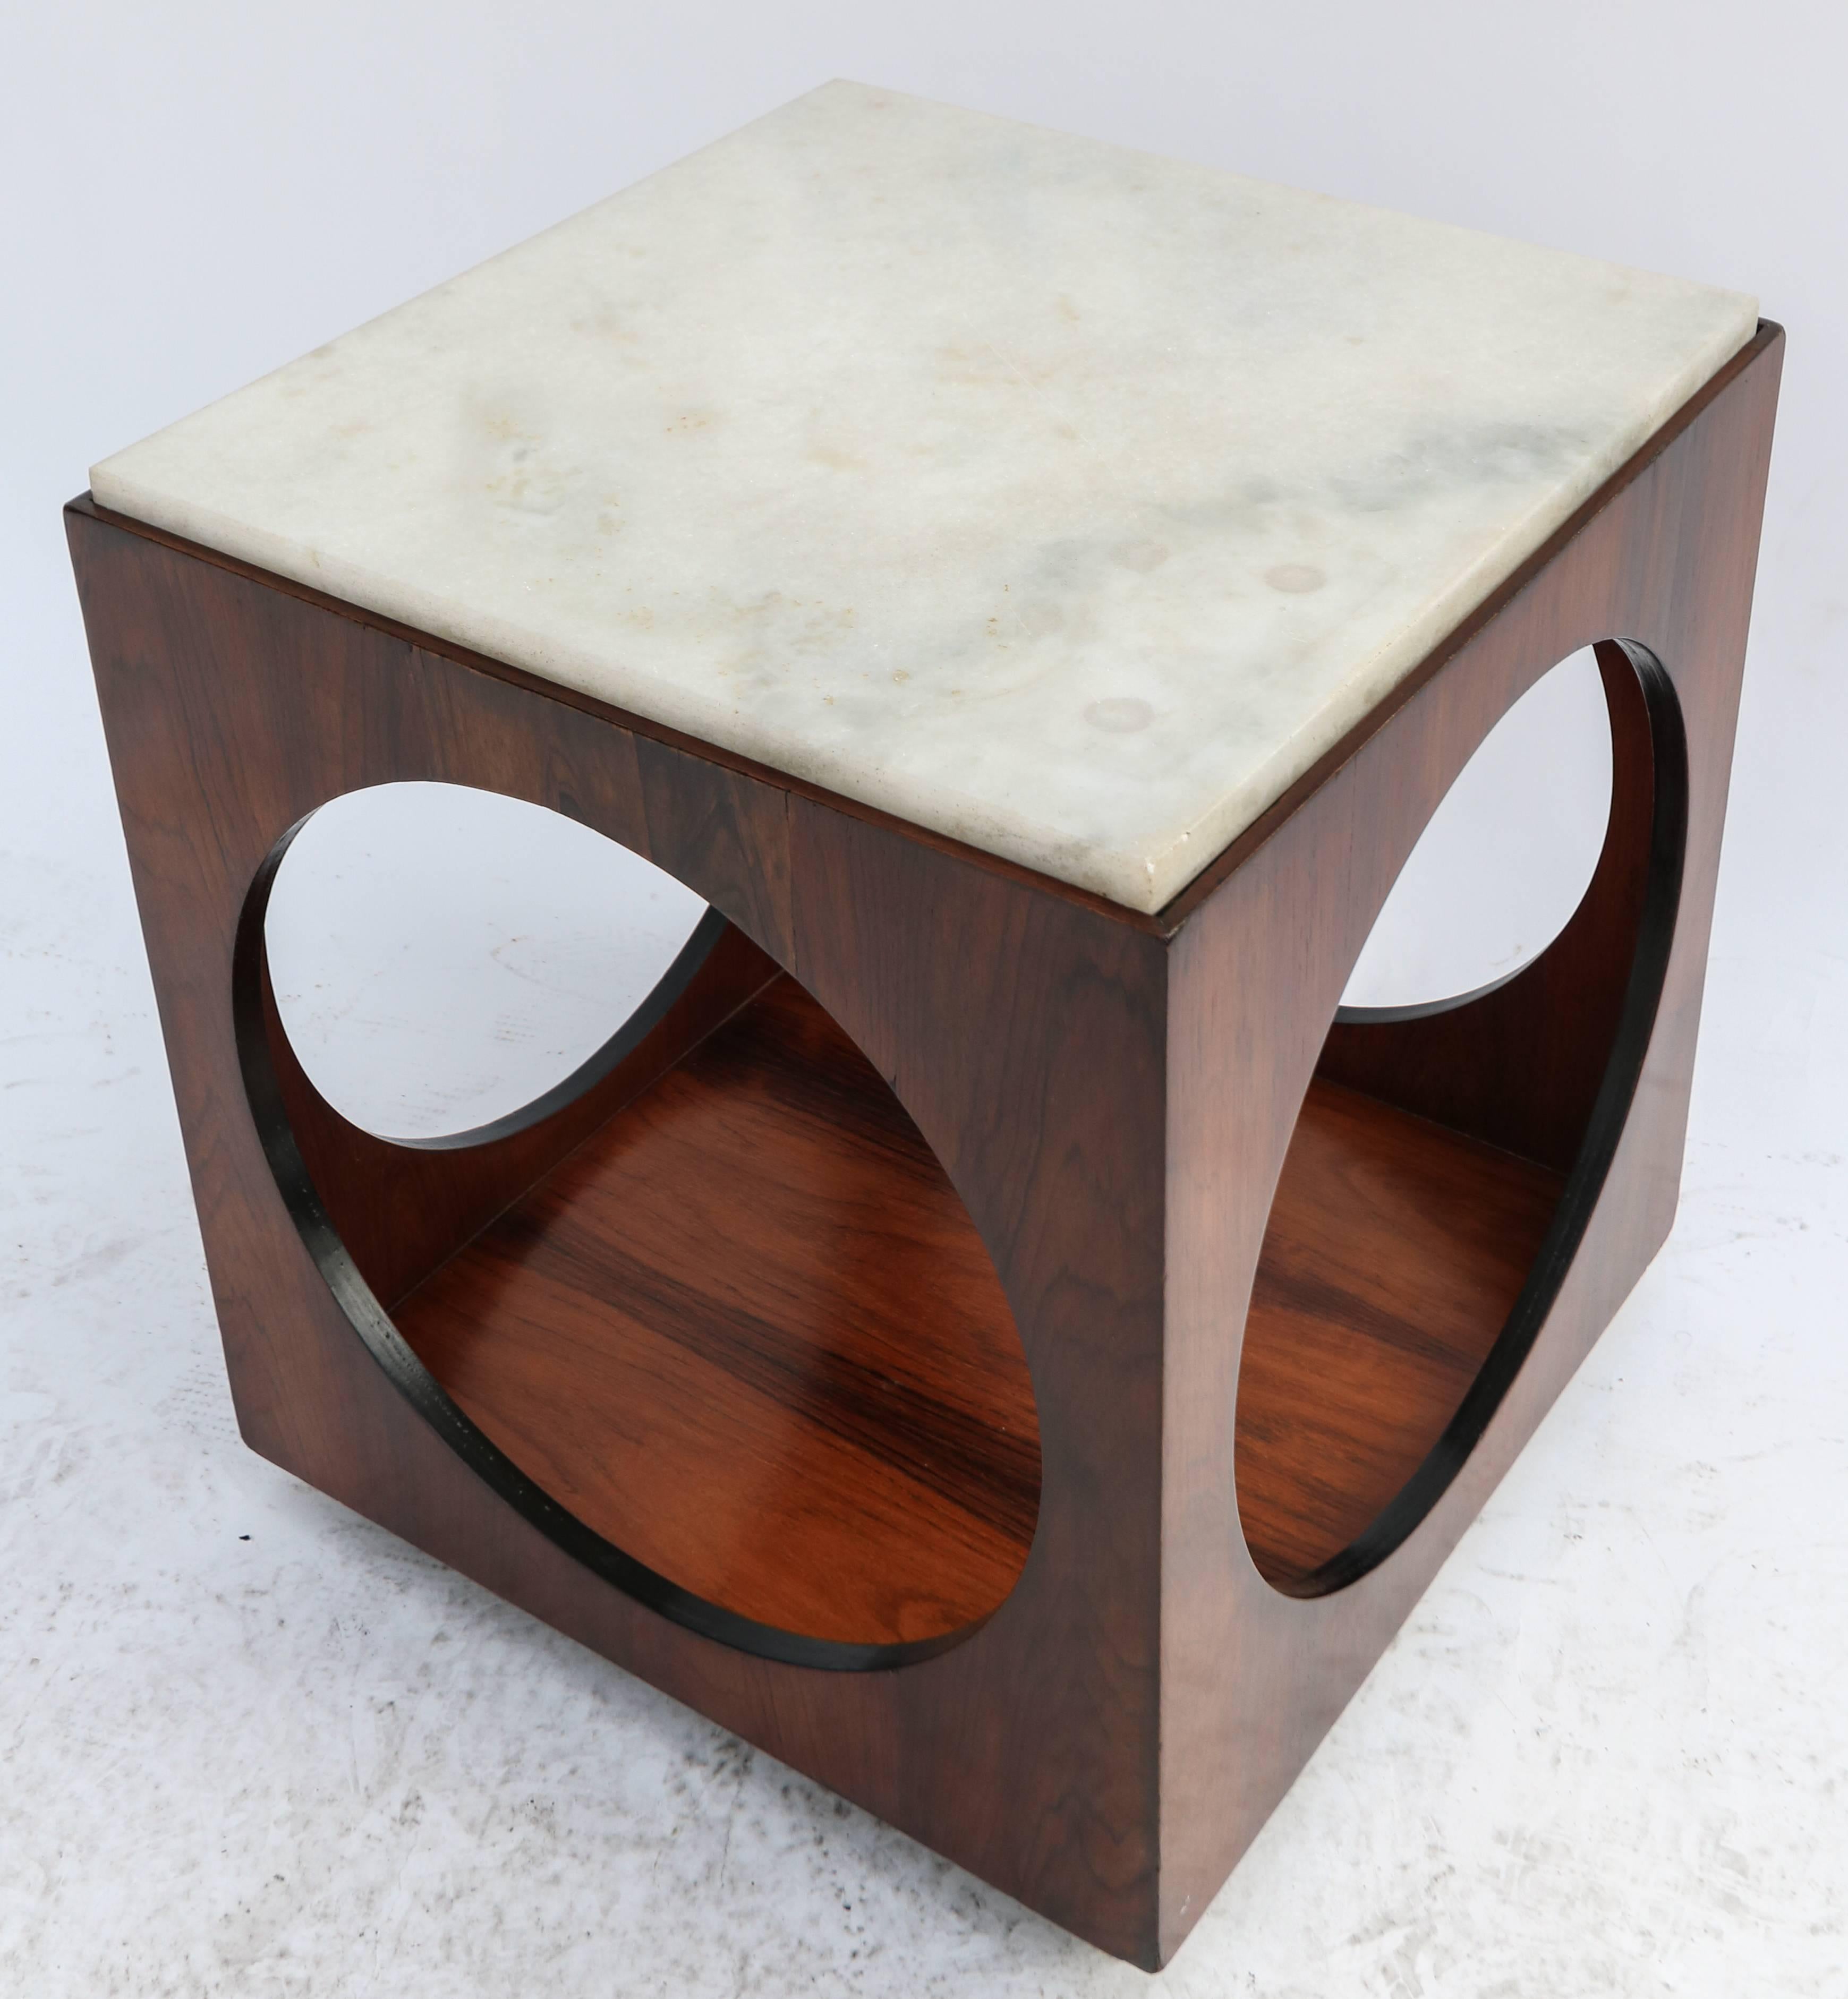 Pair of 1960s side tables by Novo Rumo in brown Brazilian jacaranda wood with white marble tops.